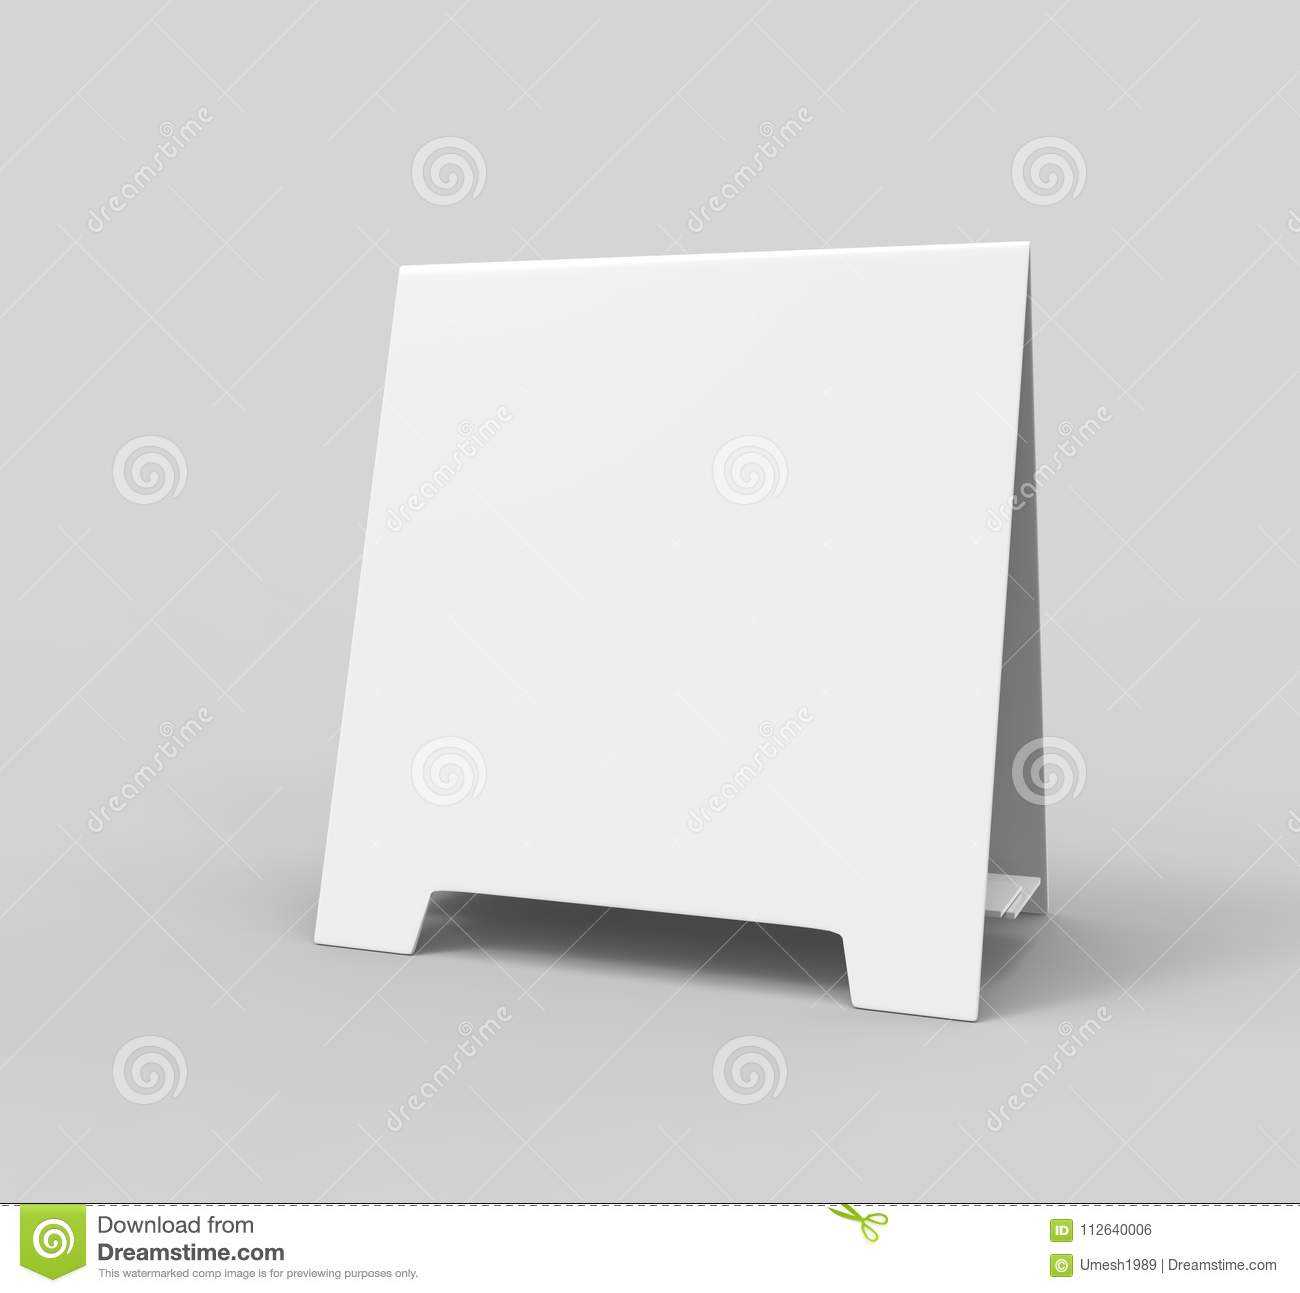 Tablet Tent Card Talkers Promotional Menu Card White Blank Intended For Blank Tent Card Template